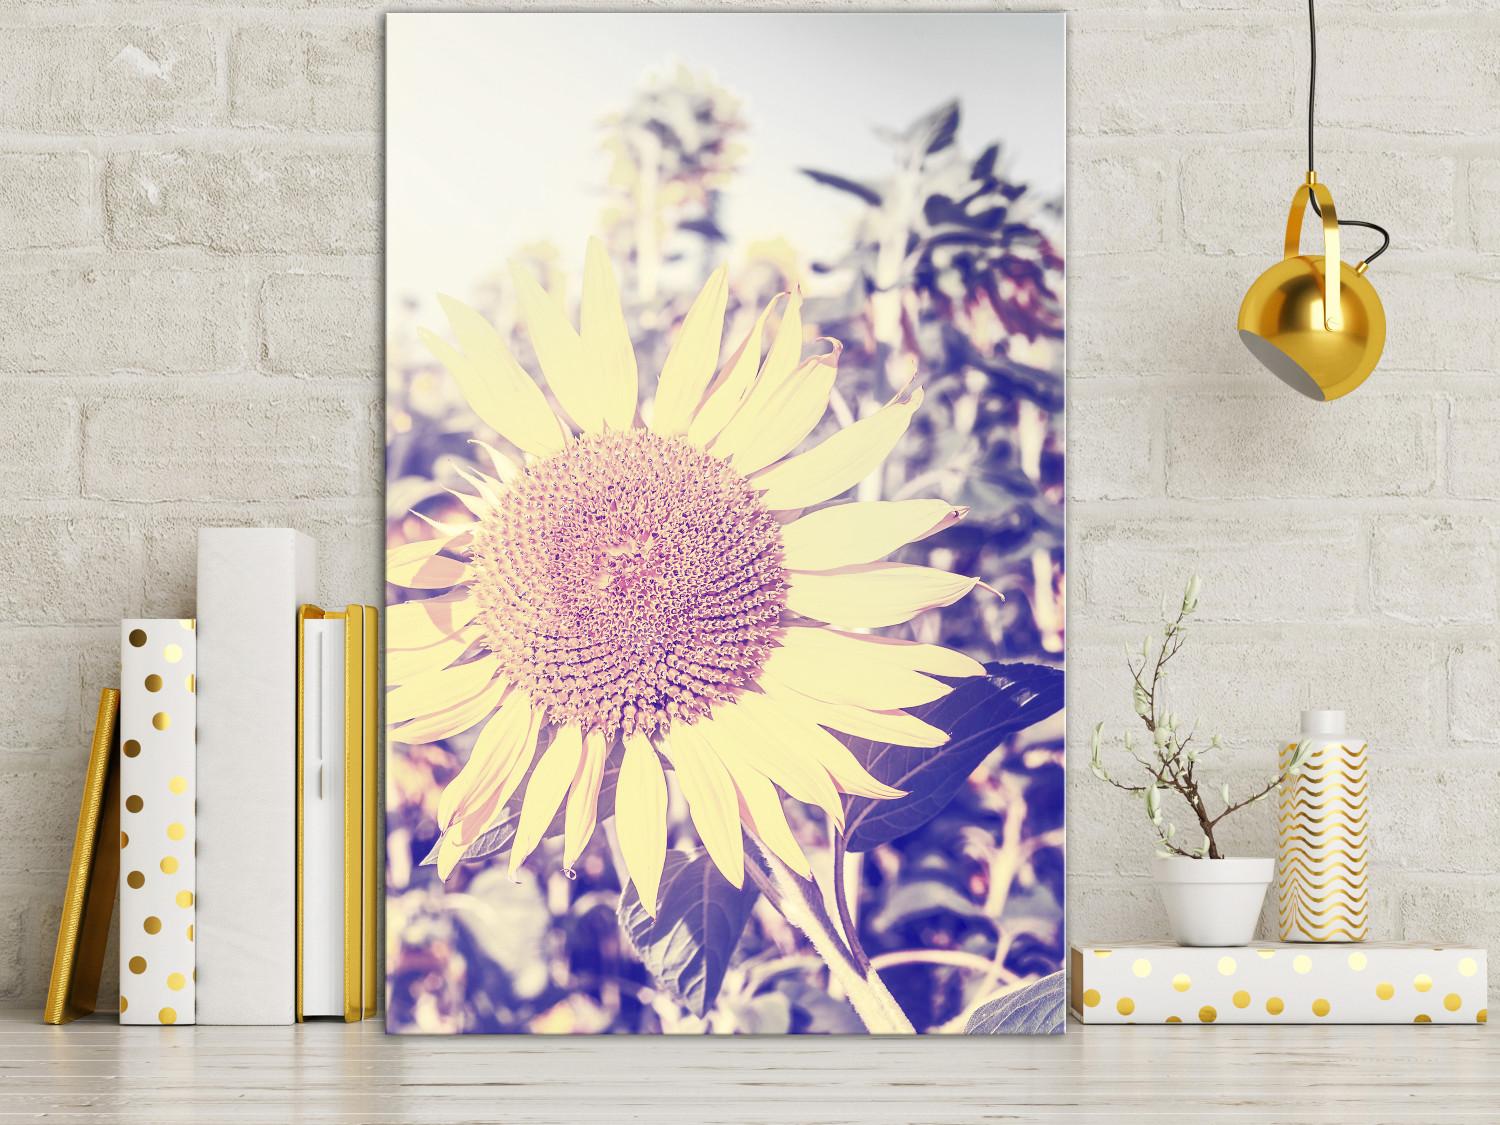 Canvas The memory of summer - a sunflower in a field with a purple glow